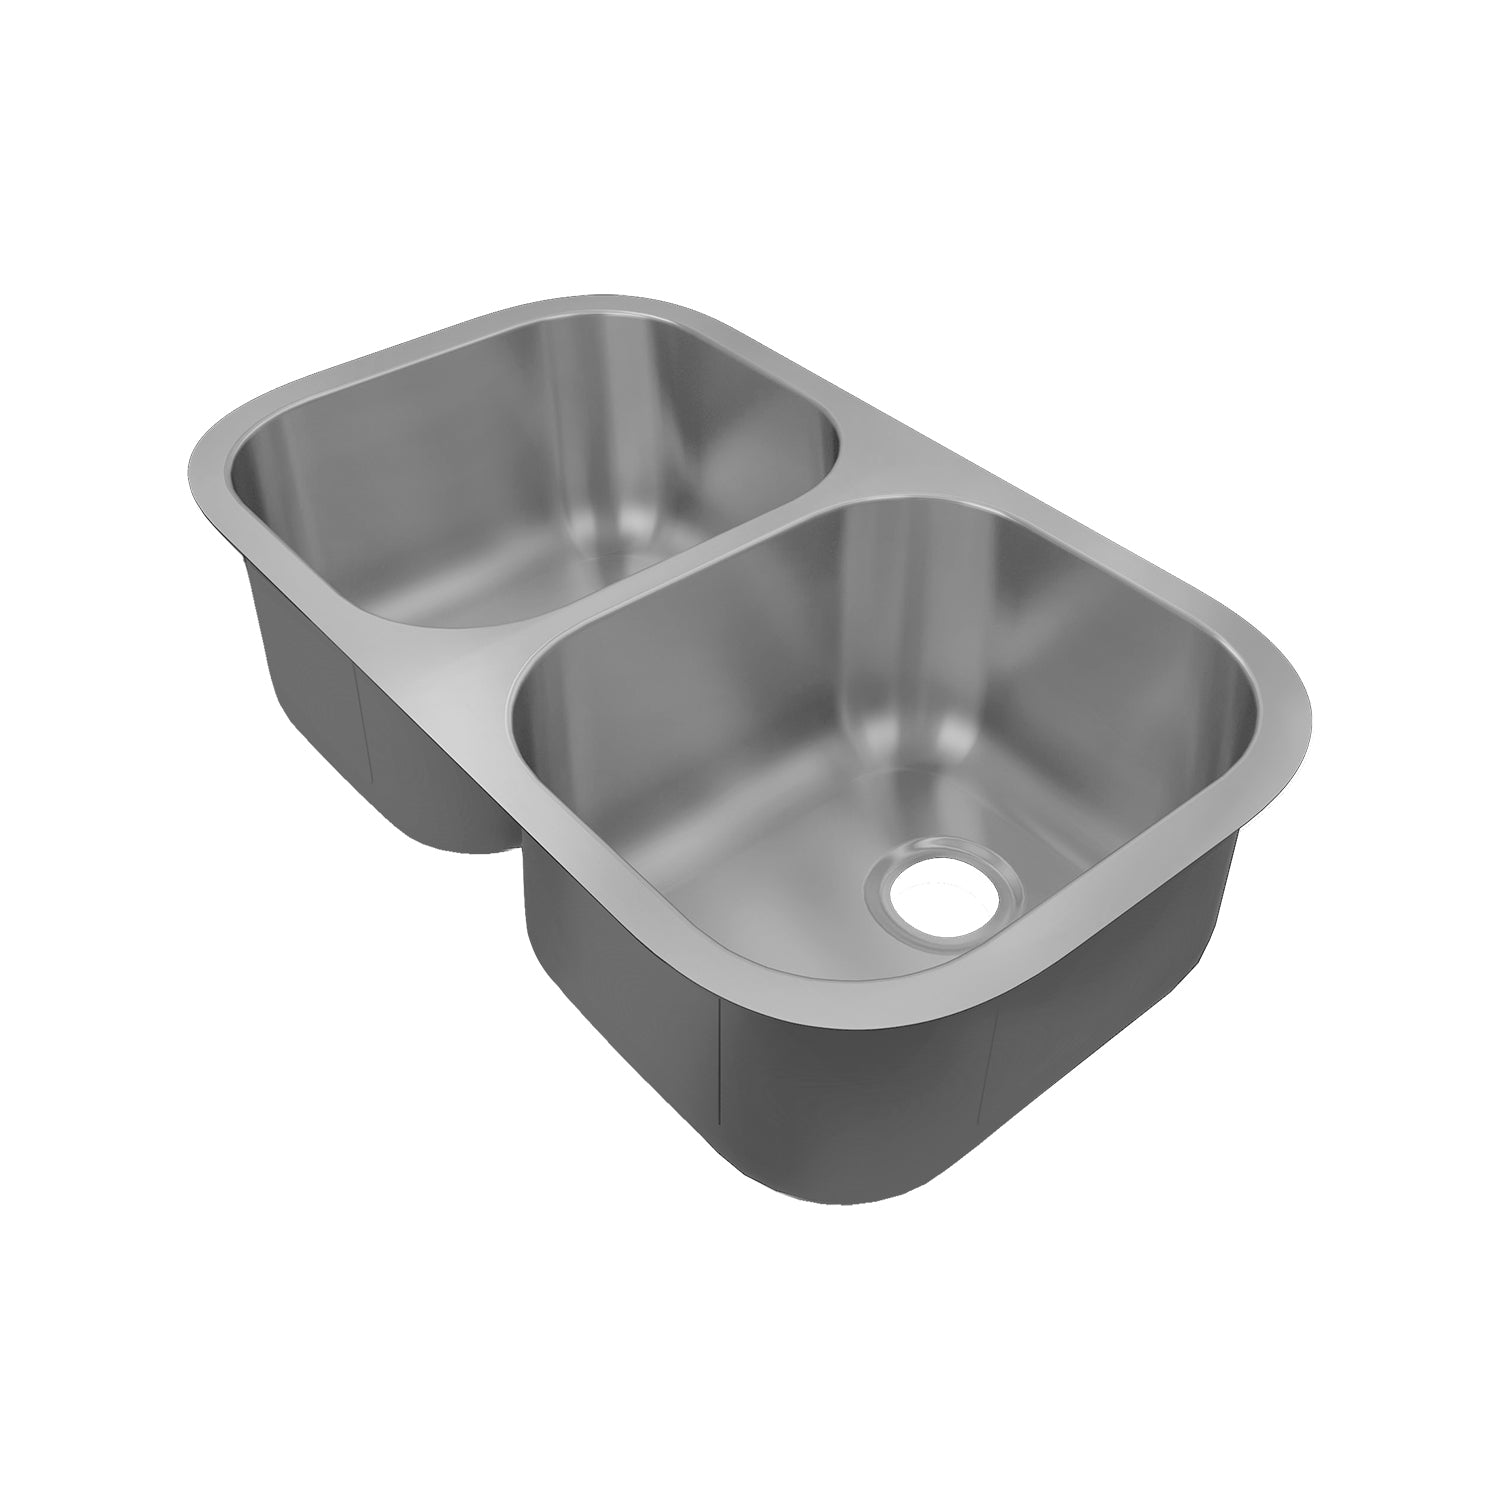 Sinber 32" x 18" x 9" Undermount Double Bowl Kitchen Sink with 18 Gauge 304 Stainless Steel Satin Finish MU3218D (Sink Only)